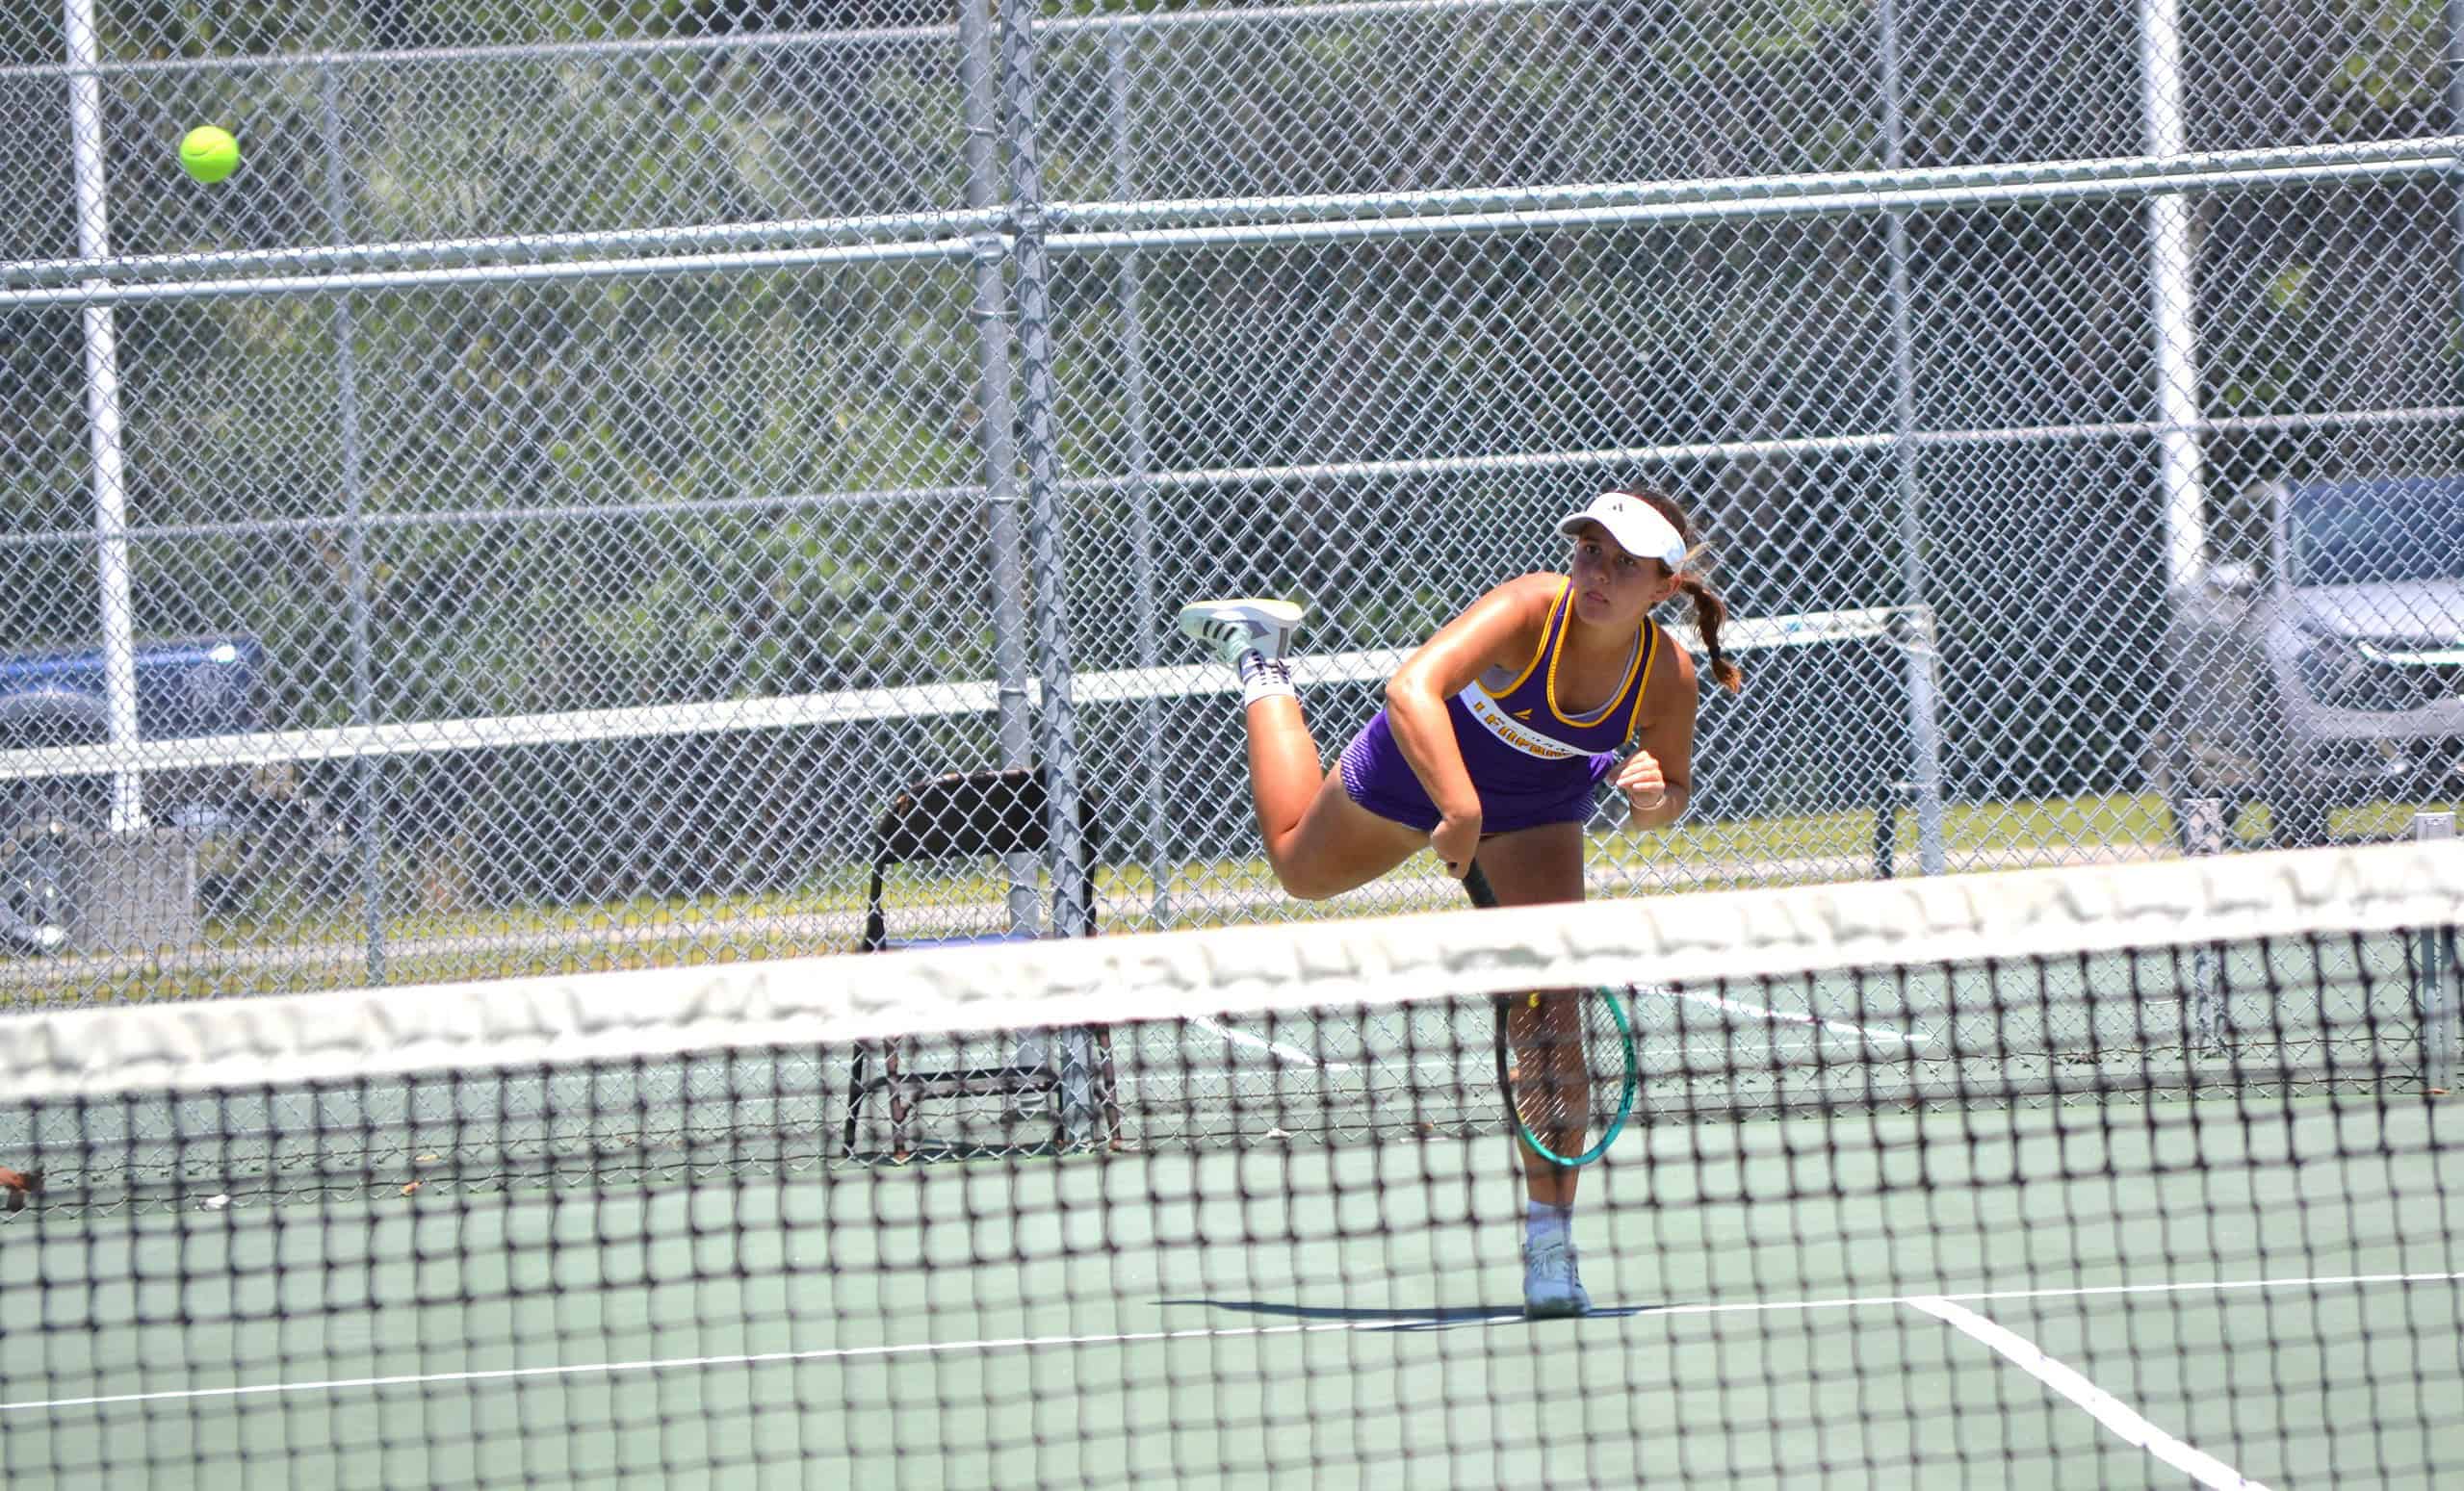 Hernando's Annabelle Chamberlain returns a shot during a No. 2 doubles match in the District 2A-6 Tournament on Wednesday in Crystal River. Photo by Chris Bernhardt Jr.